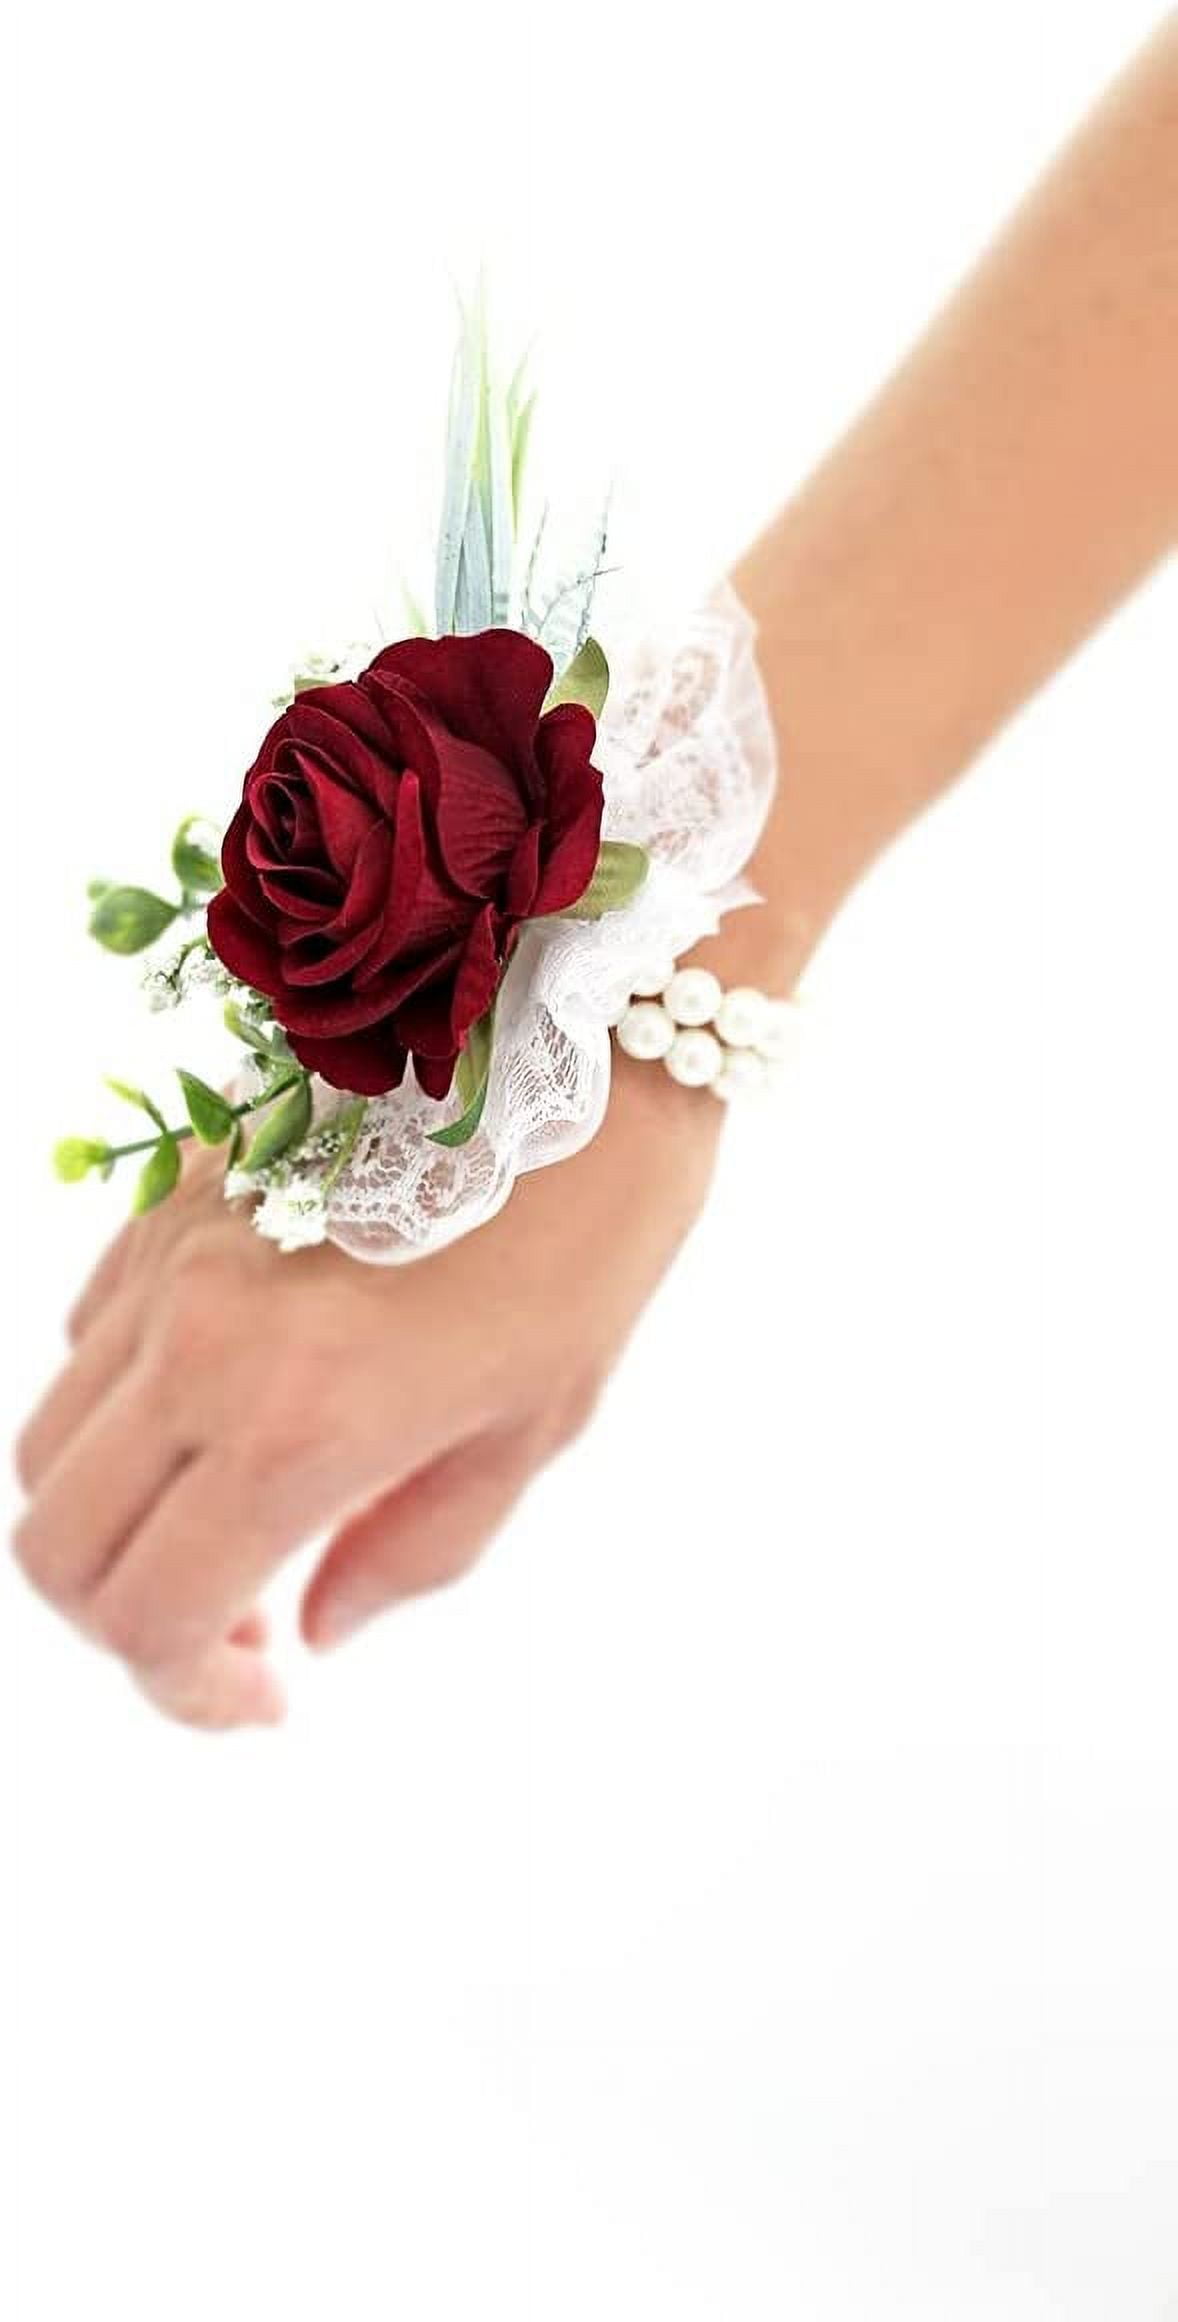 Campsis 2pcs Wedding Wrist Flower Wine Red Floral Wrist Corsage Bridal Rose Leaf Hand Flowers for Bride and Bridesmaid Festival Prom Engagement